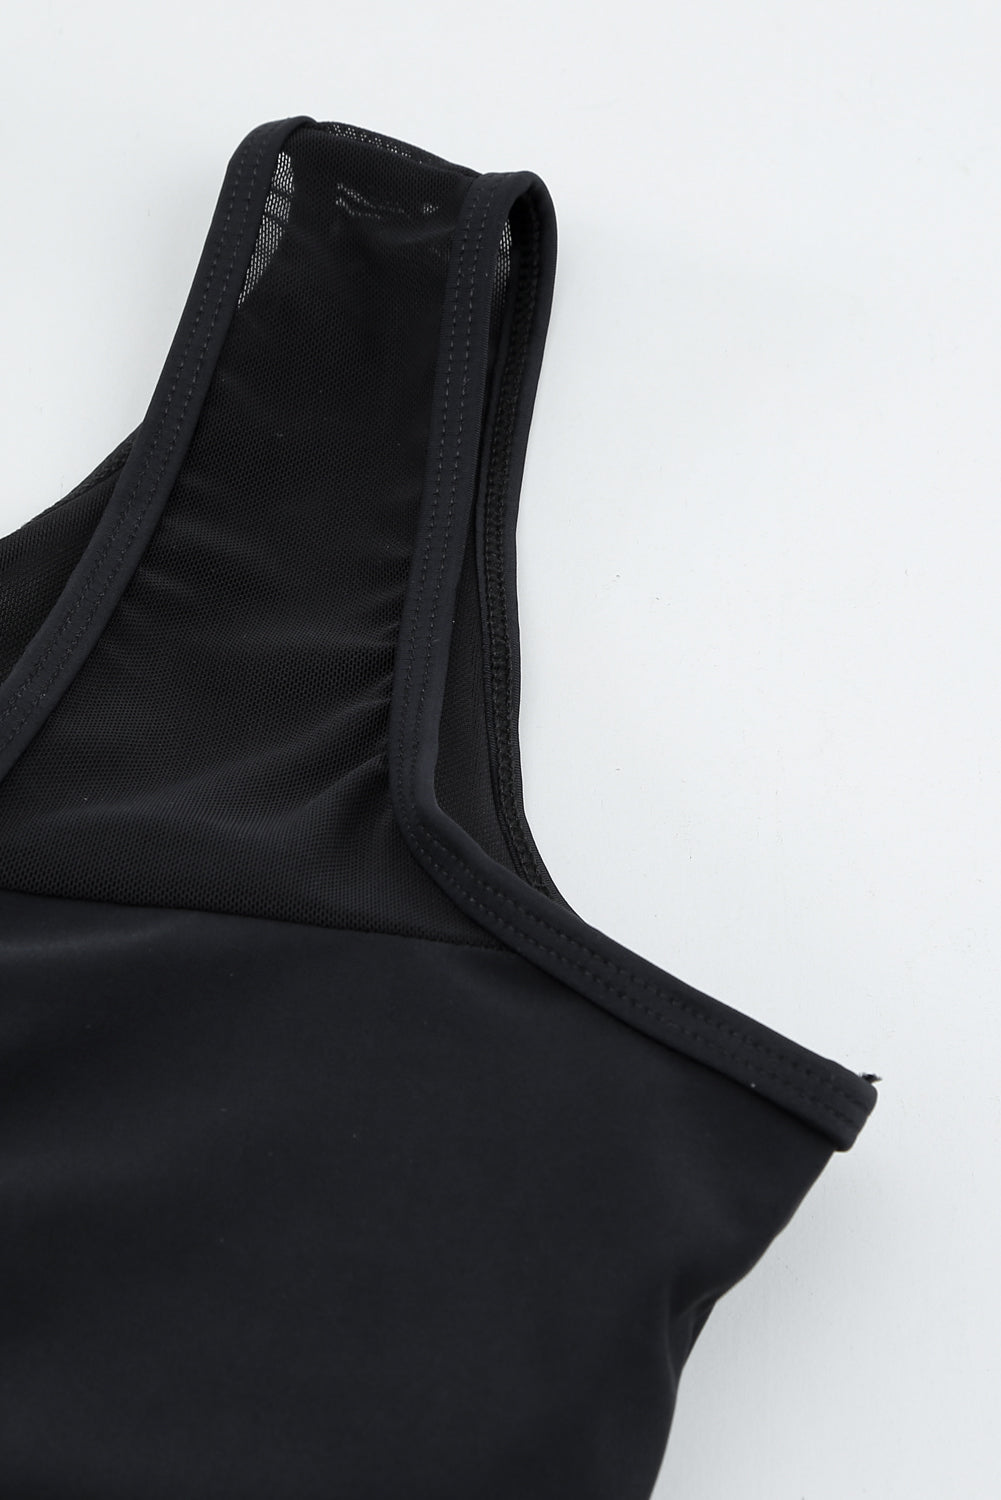 Black Strappy Hollow-Out Back Mesh One-Piece Swimwear